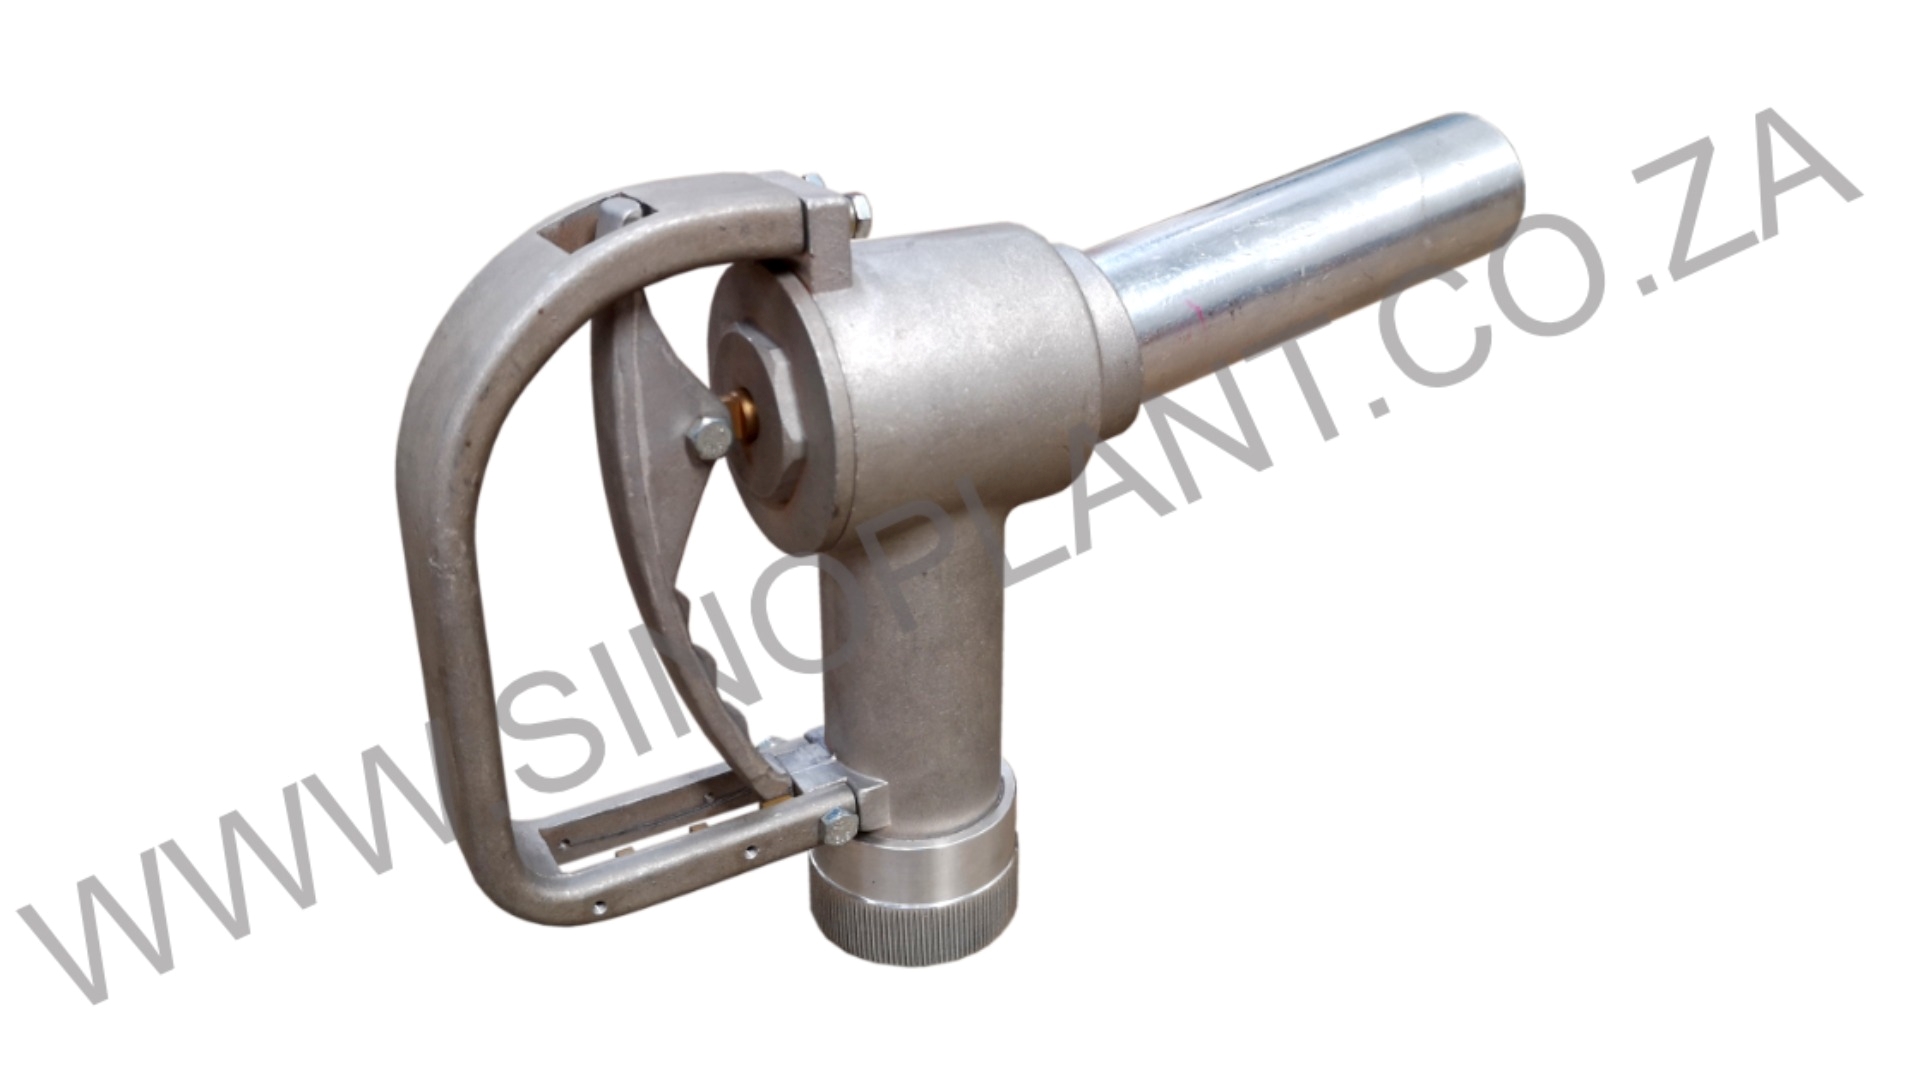 Sino Plant Fuel pumps Fuel Nozzle Manual stop 1.5" 38mm 2022 for sale by Sino Plant | Truck & Trailer Marketplaces